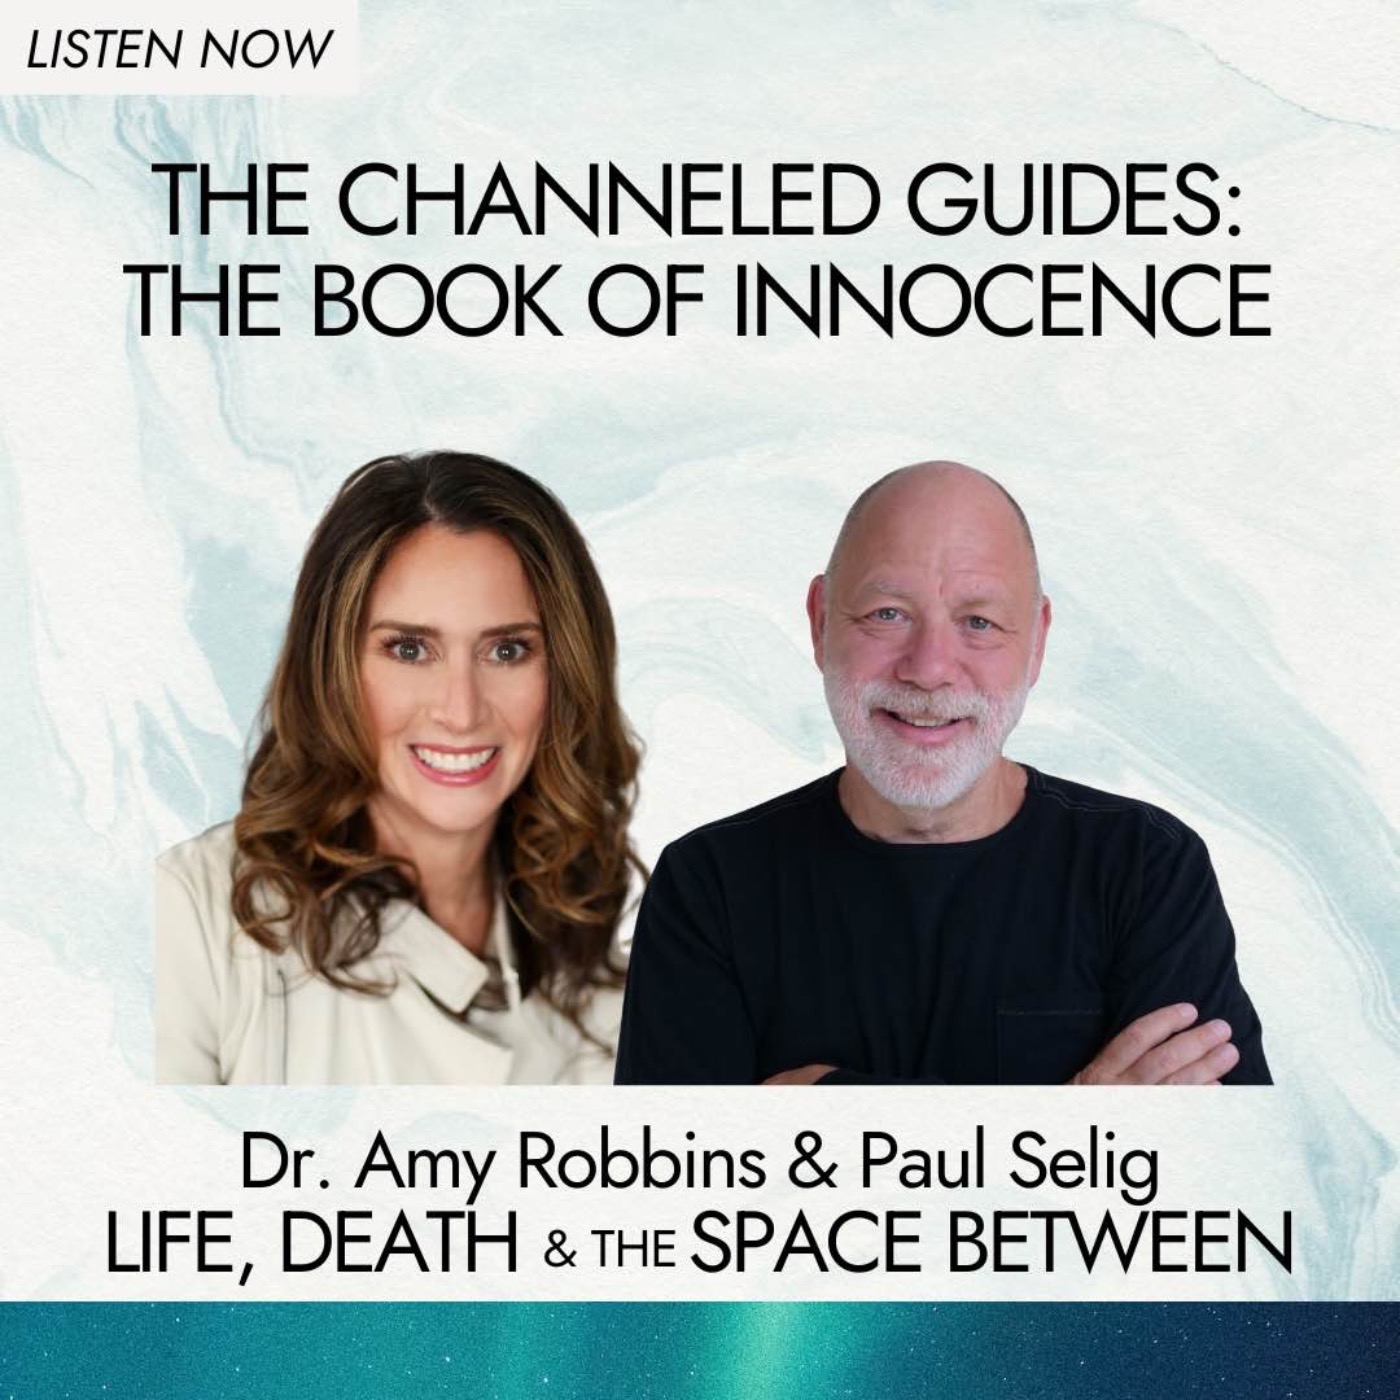 The Channeled Guides: The Book of Innocence